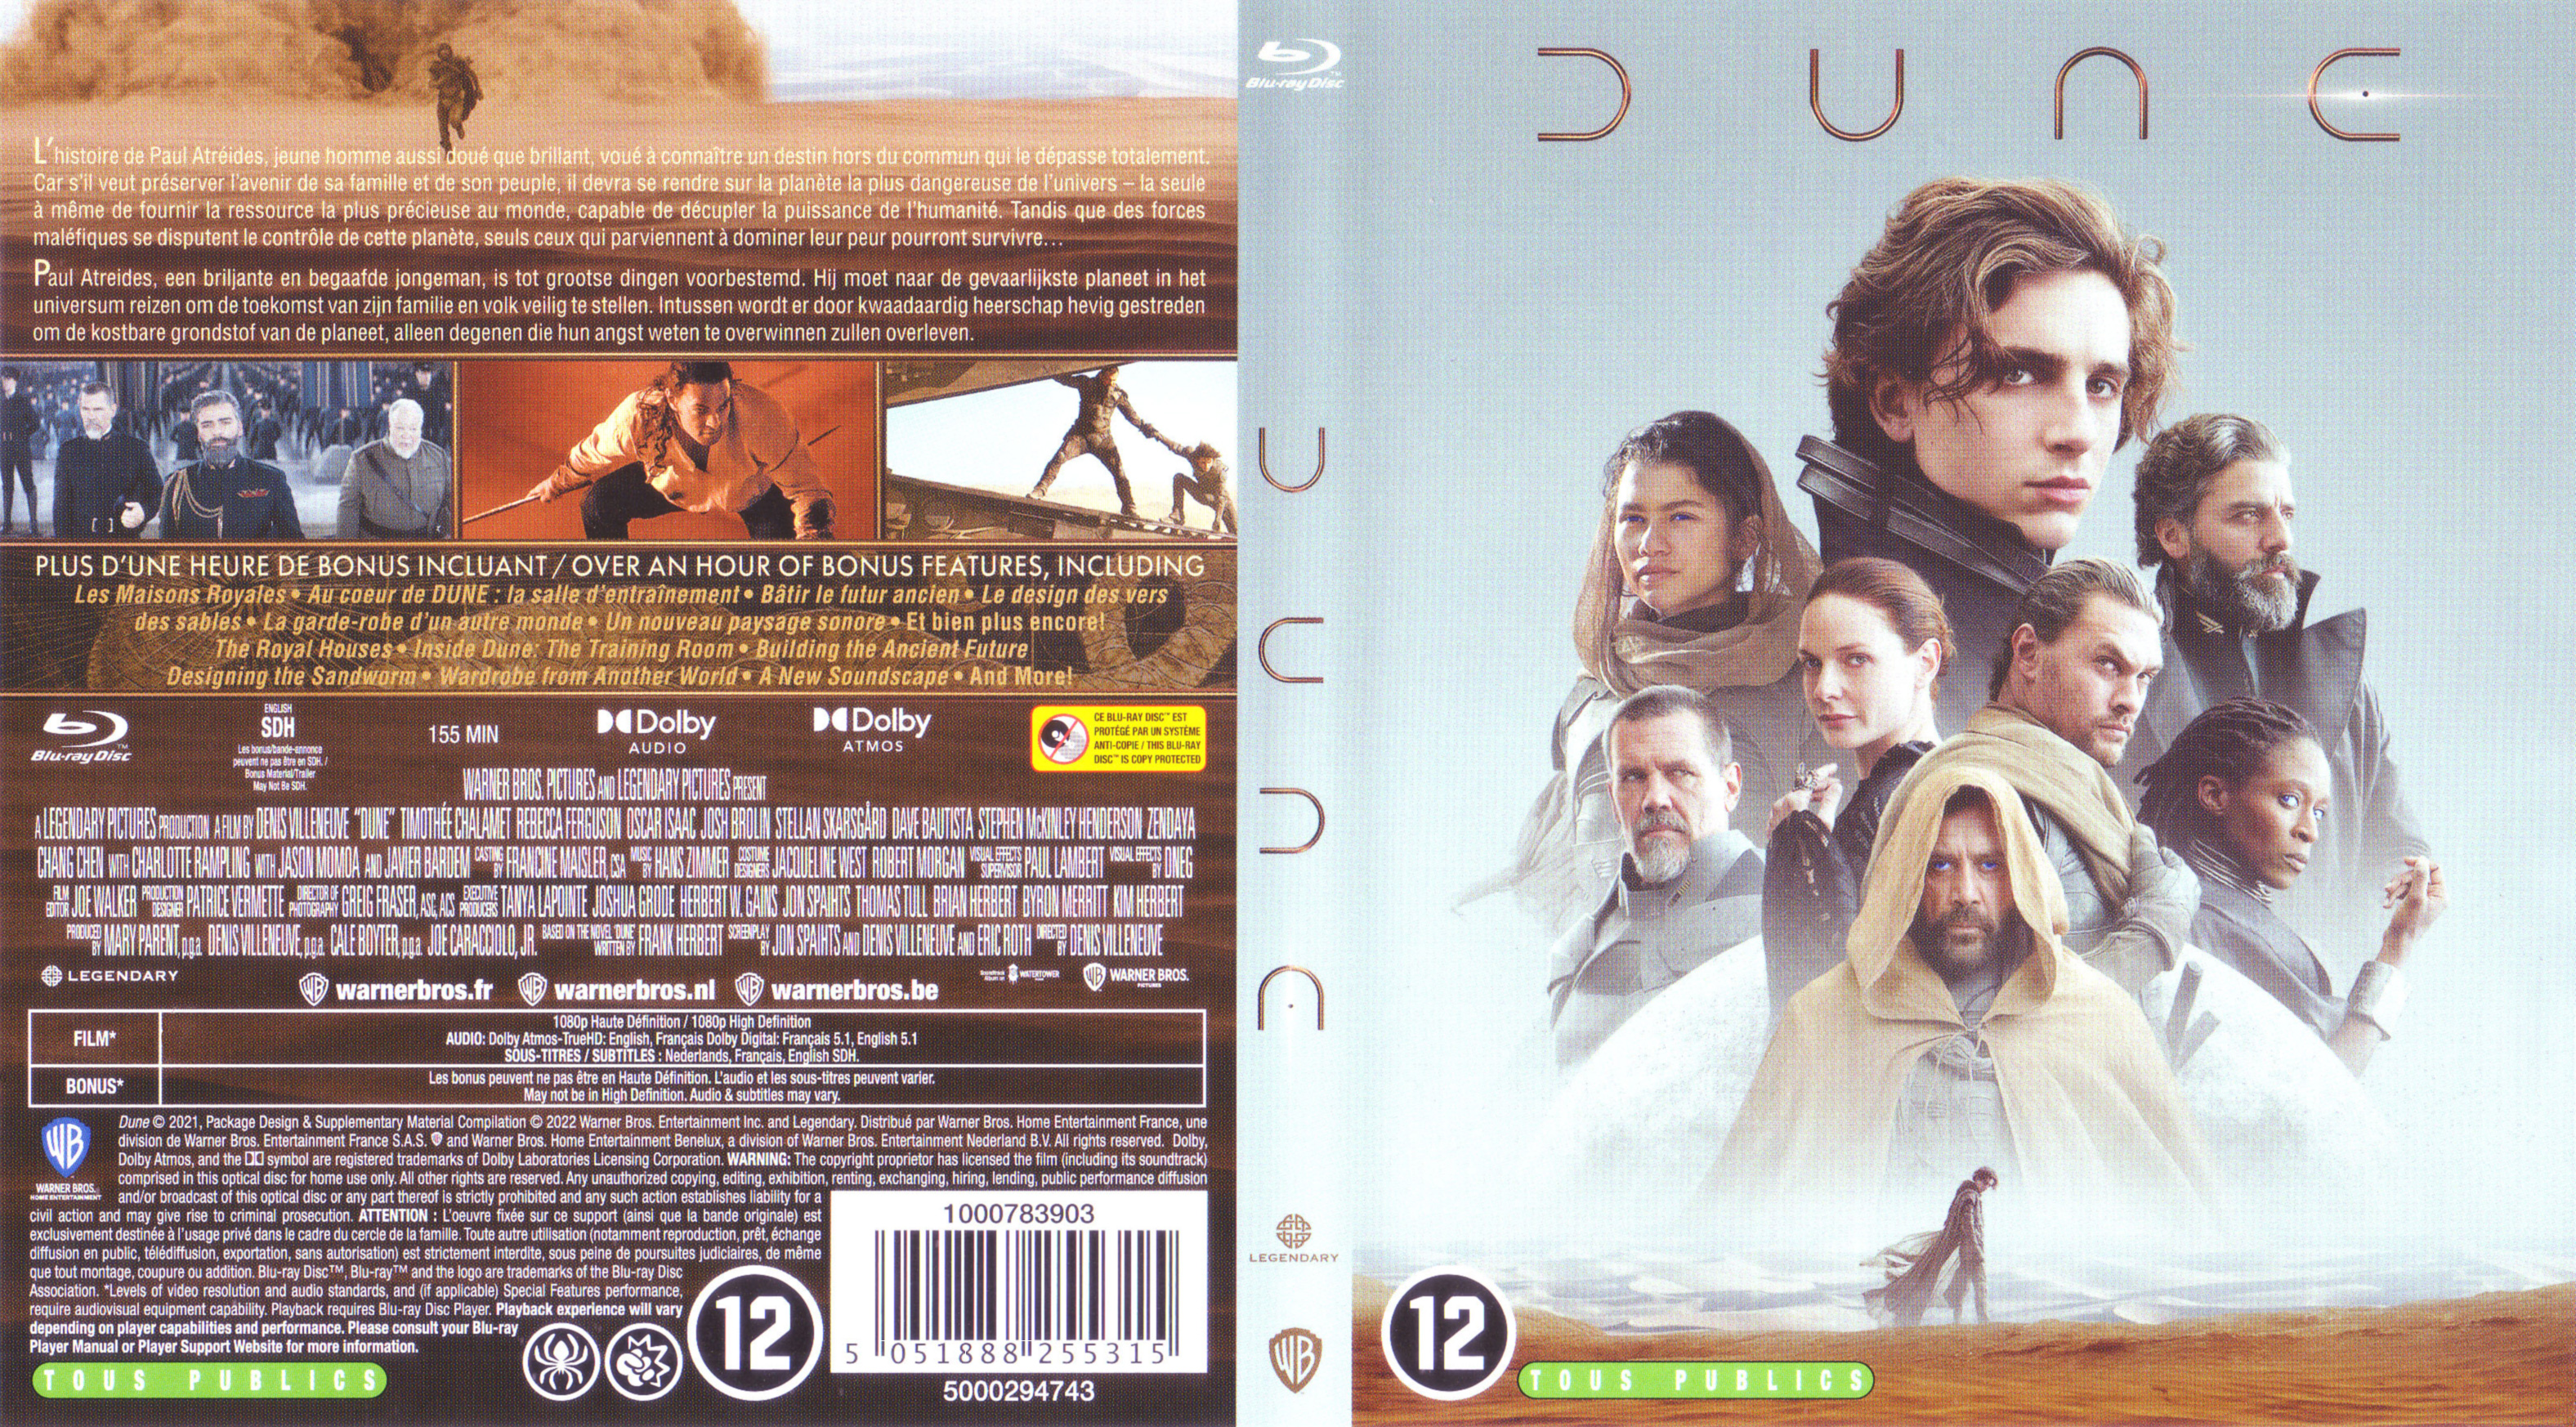 Jaquette DVD Dune 2021 (BLU-RAY)